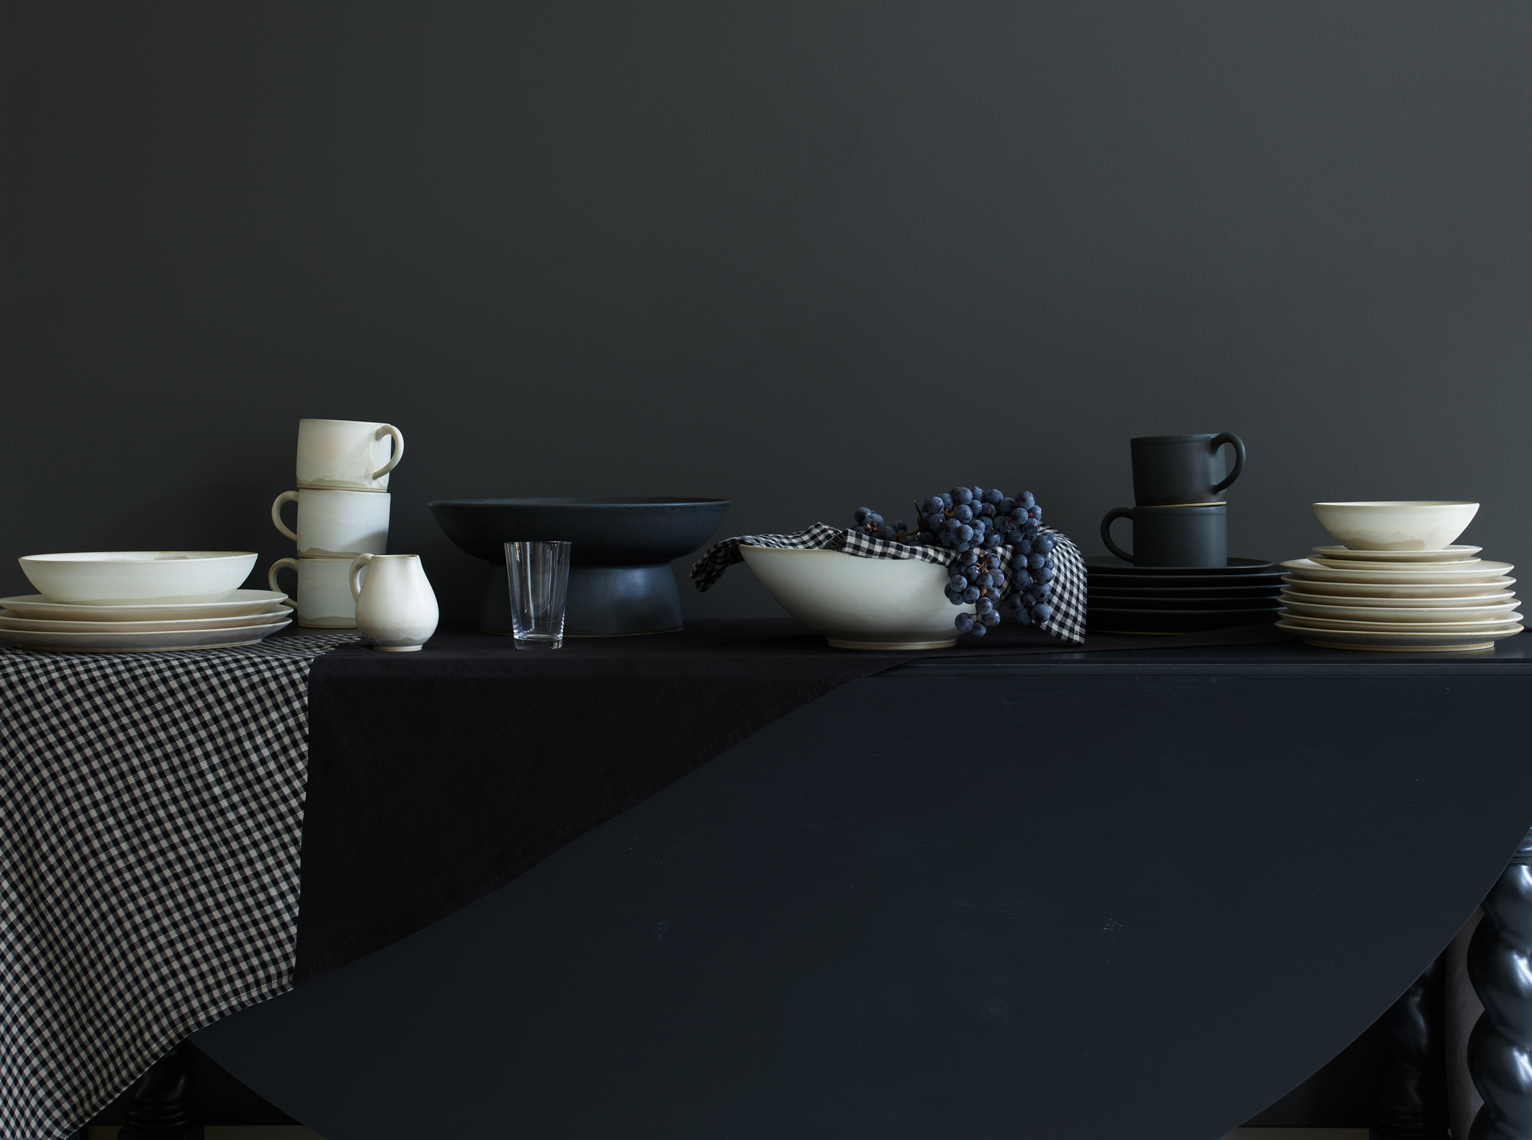 17.Mixed-Perrochon-Dinnerware-with-Once-Milano-Grey-Runner_0815-HERO-cropped-for-AP